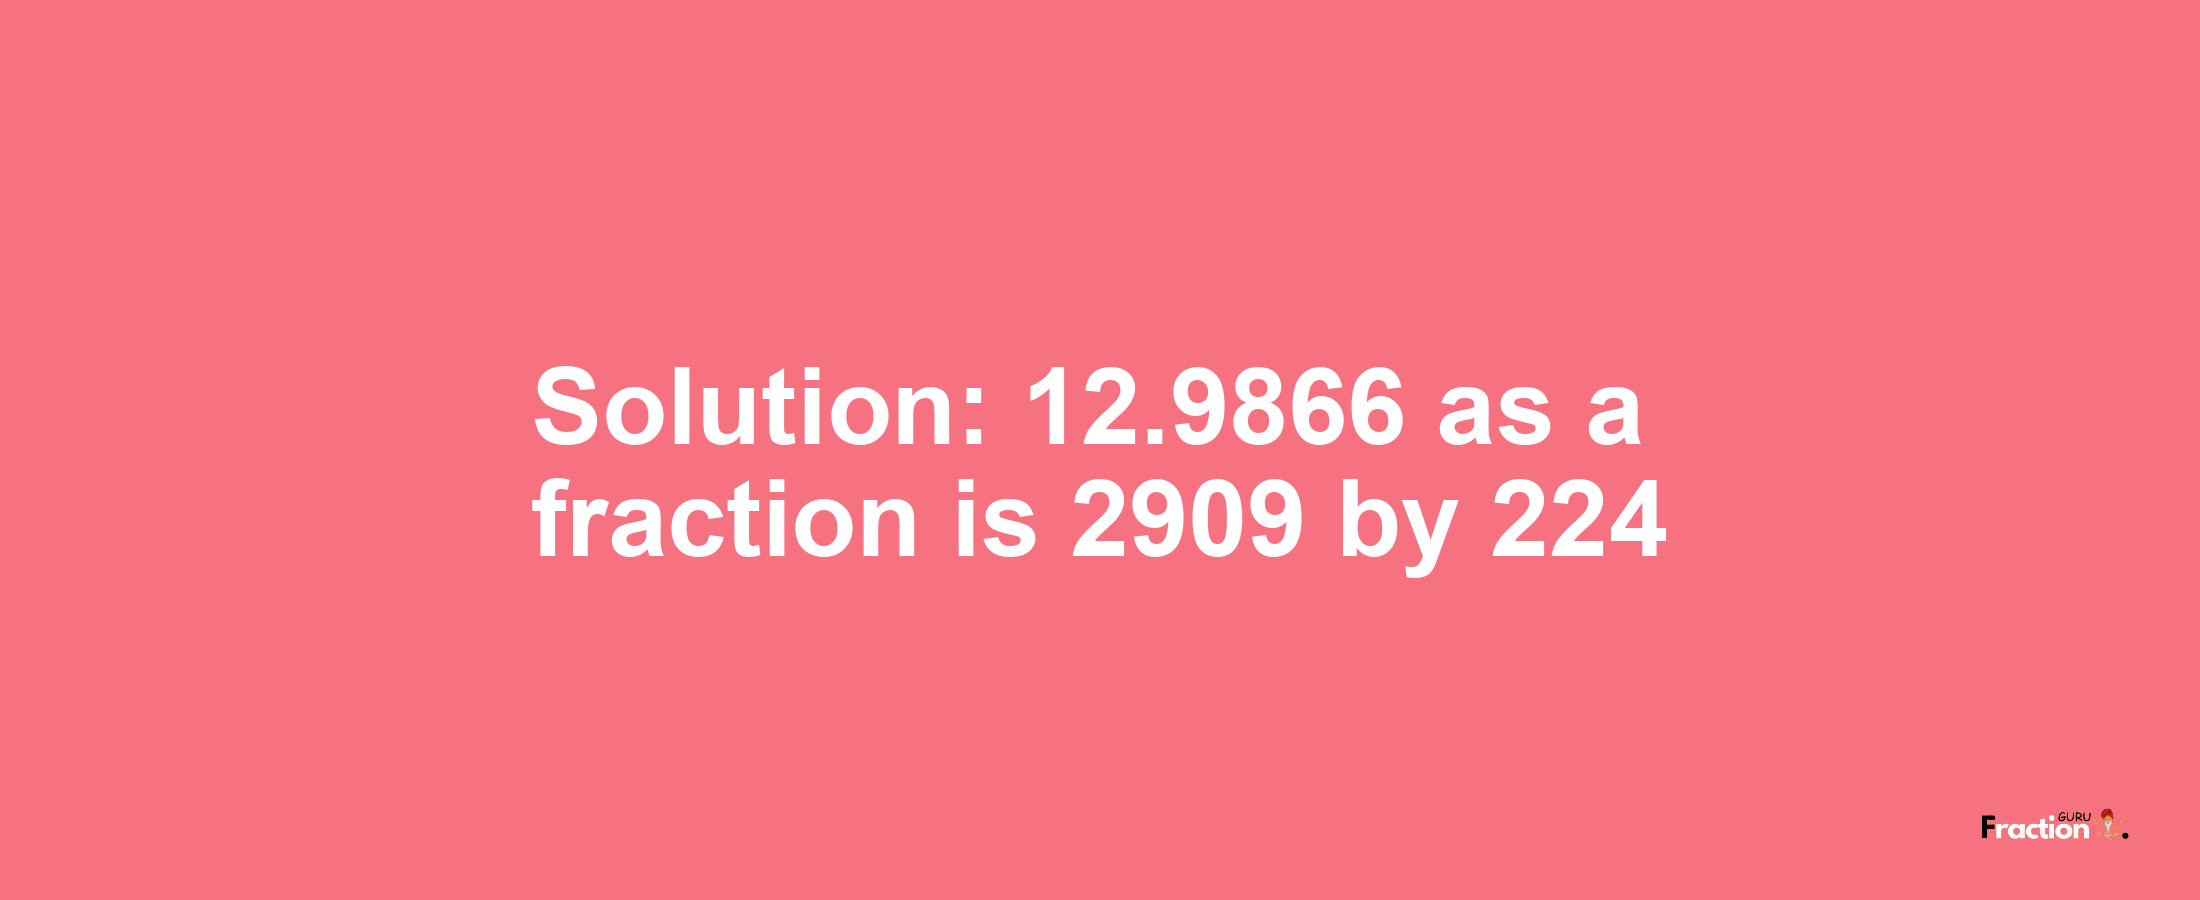 Solution:12.9866 as a fraction is 2909/224